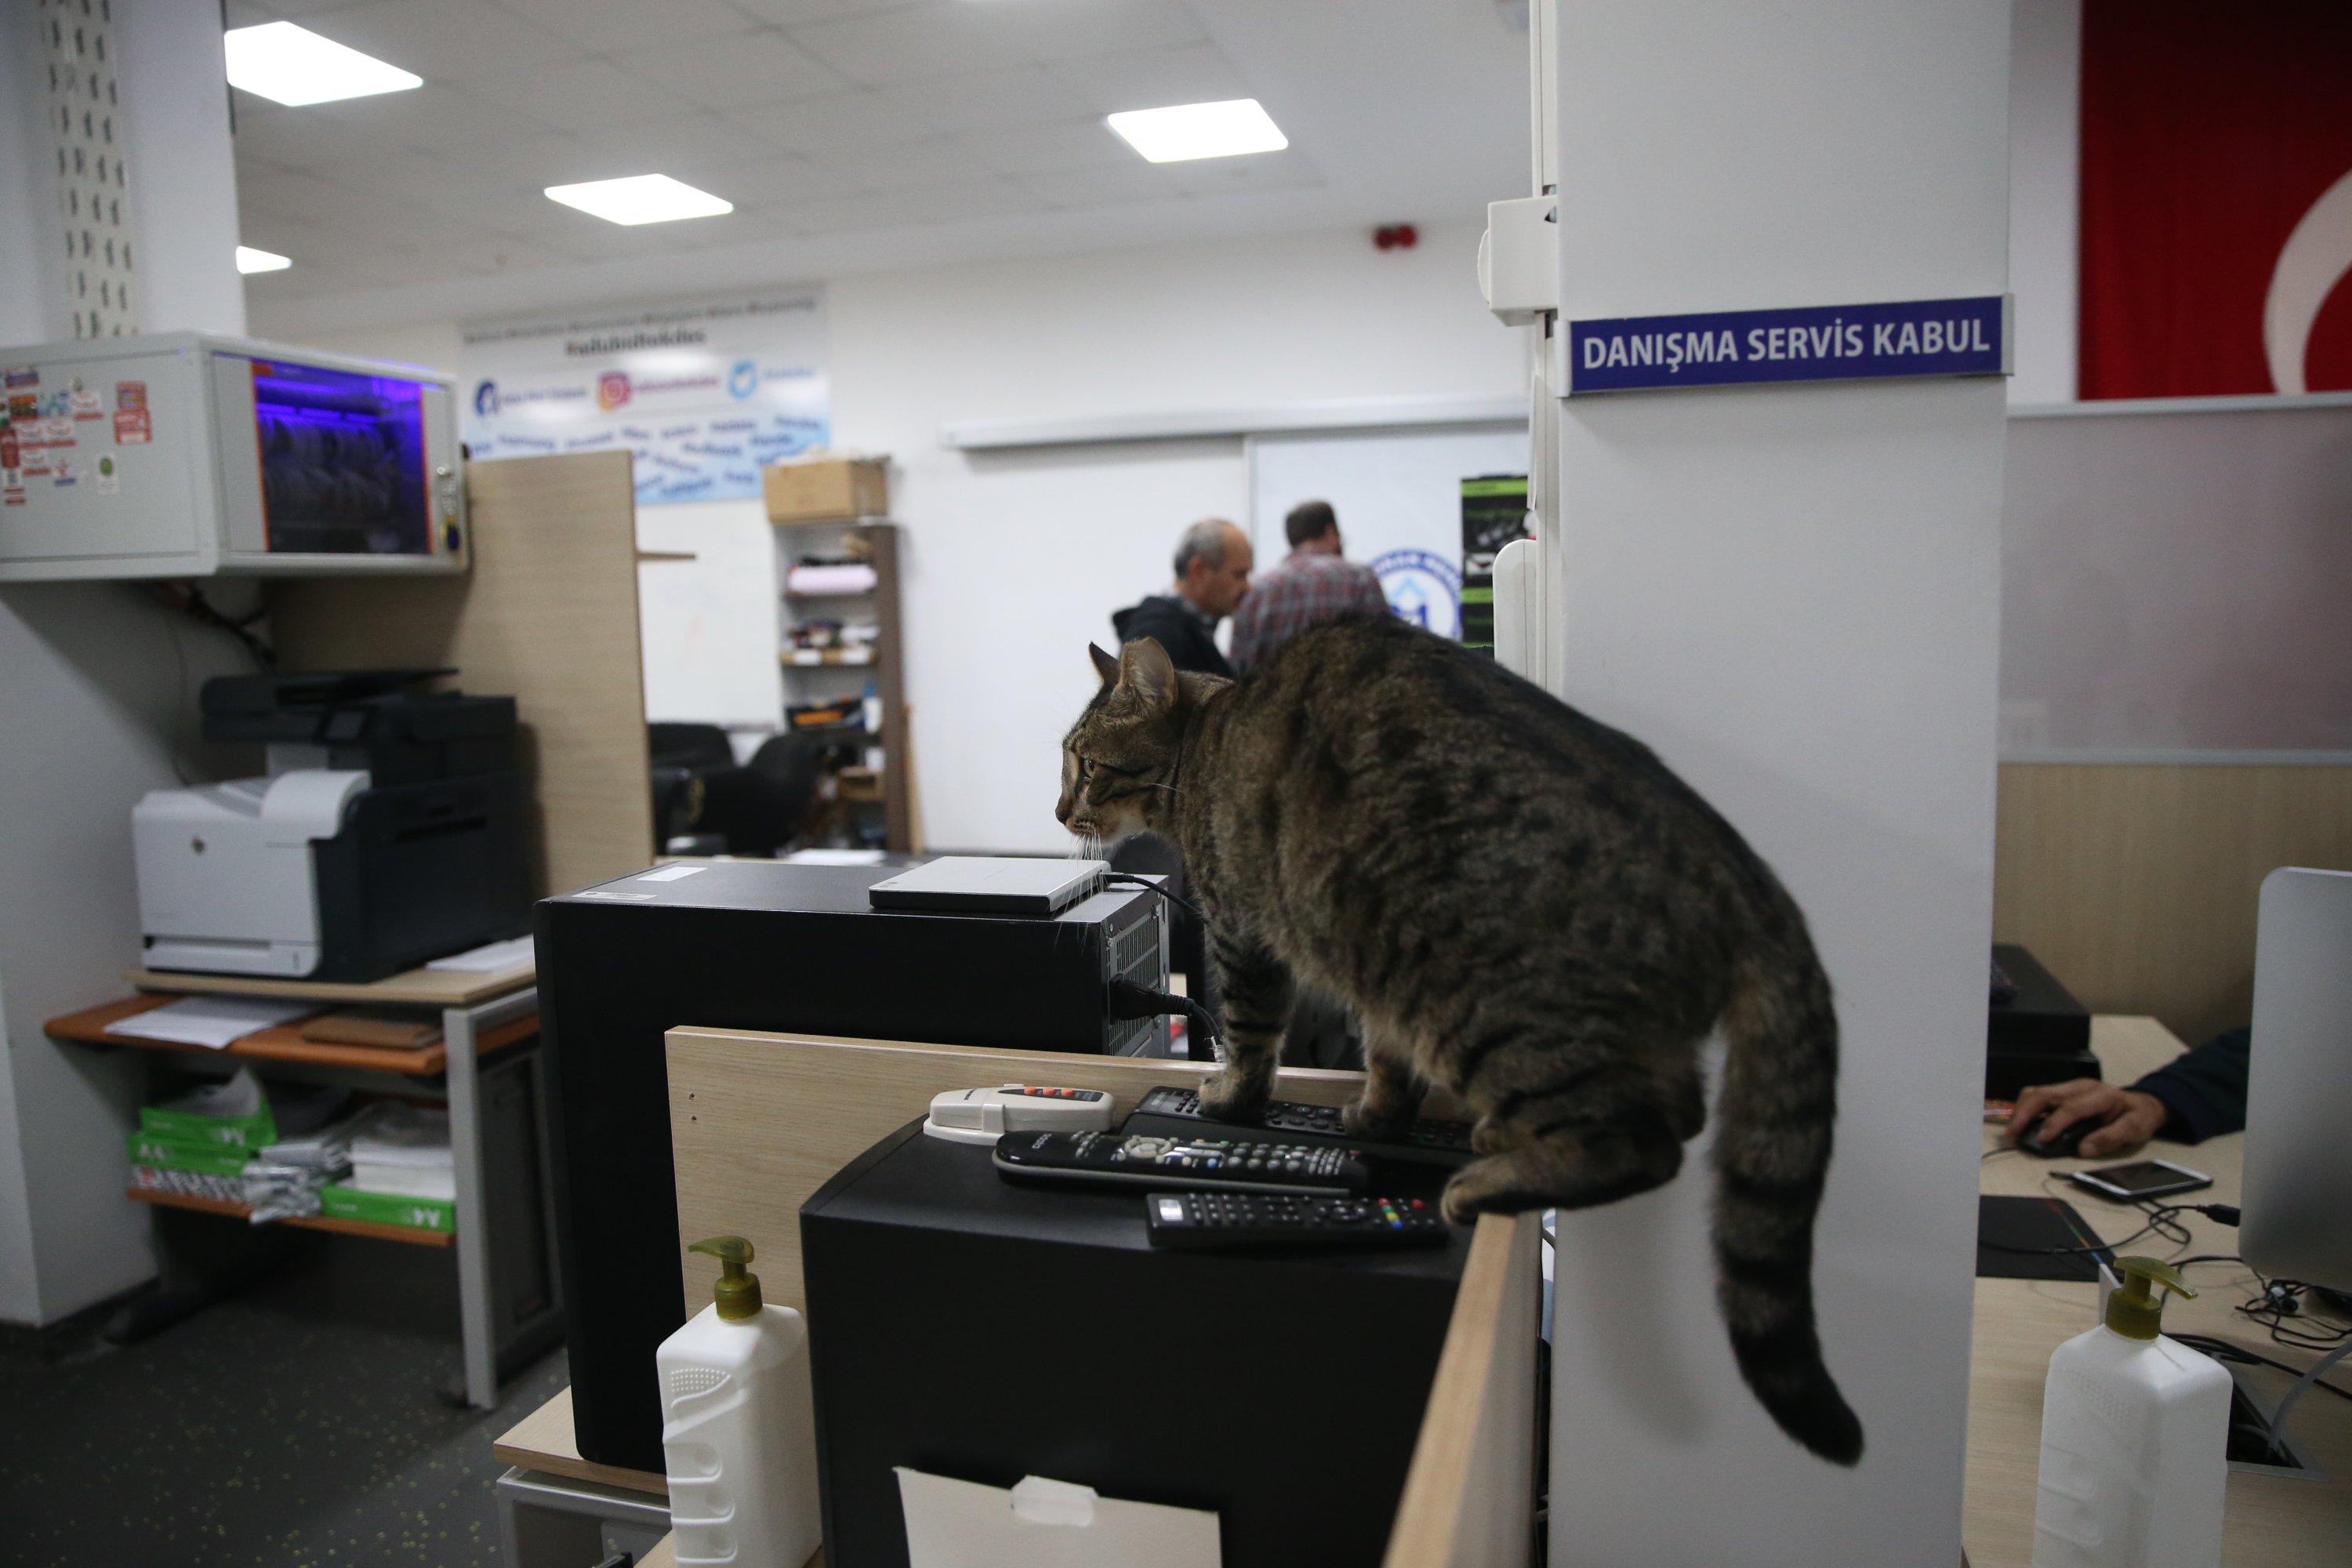 A cat perches on a cubicle in the office, in Aydın, western Turkey, Nov. 16, 2021. (AA PHOTO)